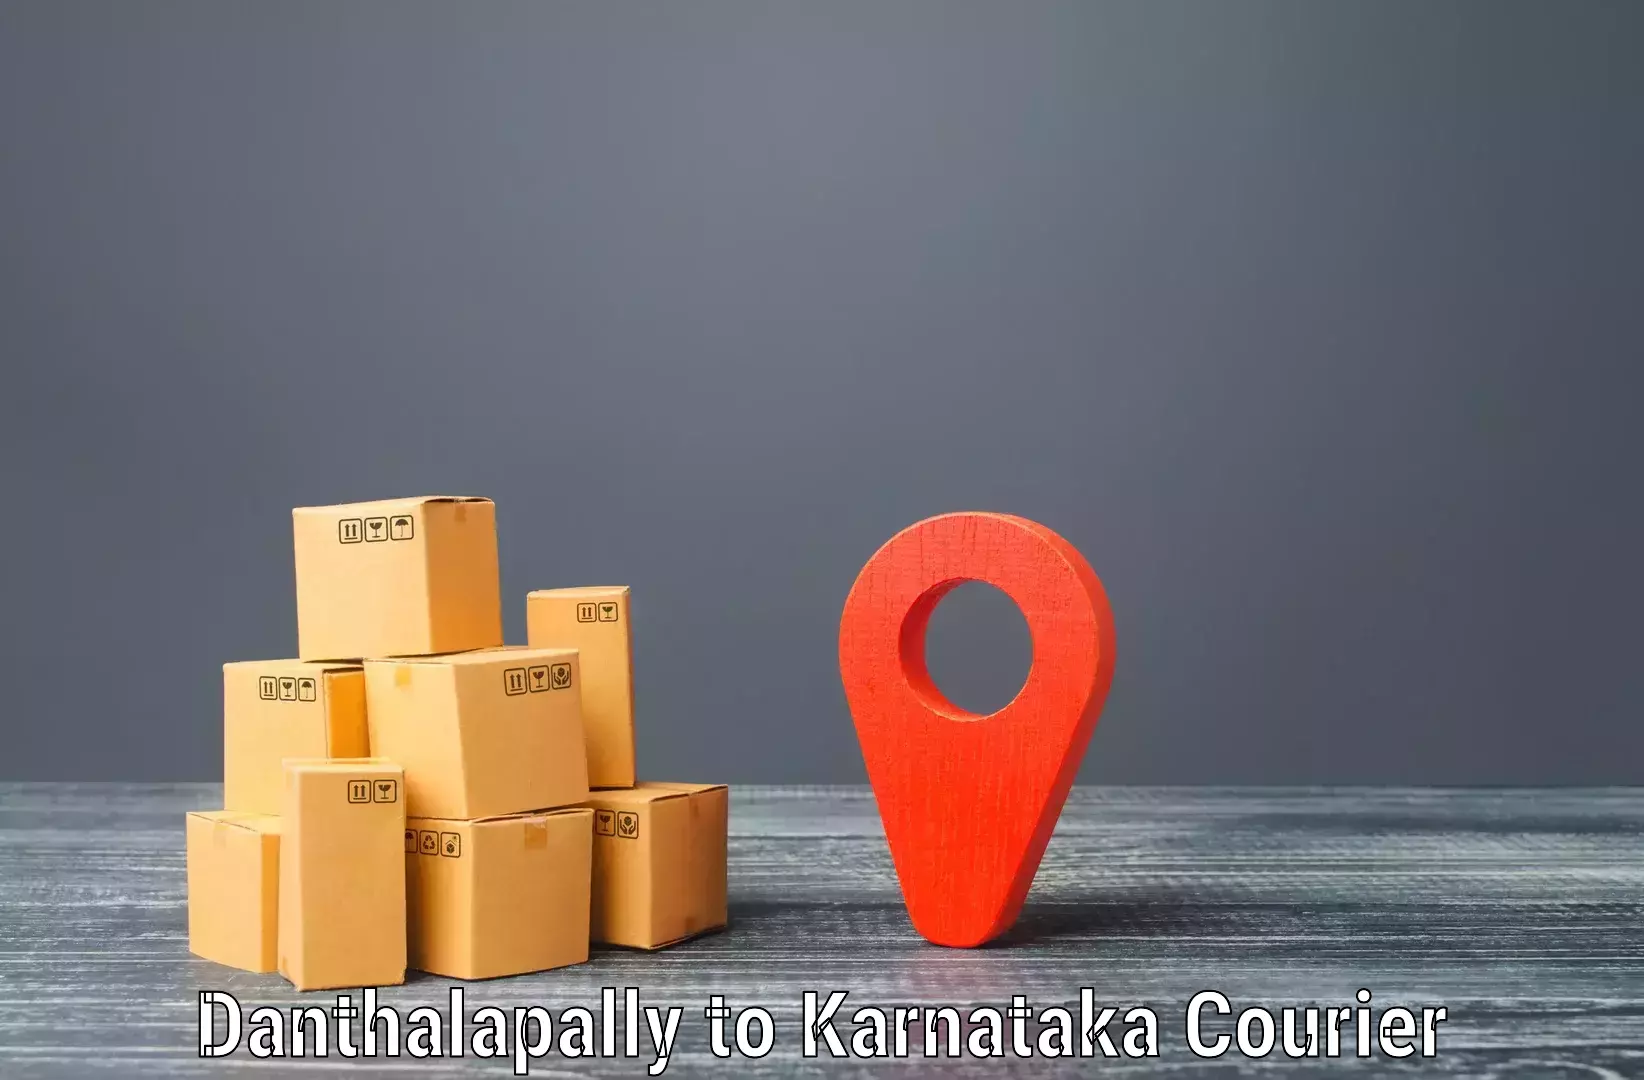 Express package services Danthalapally to Mulbagal